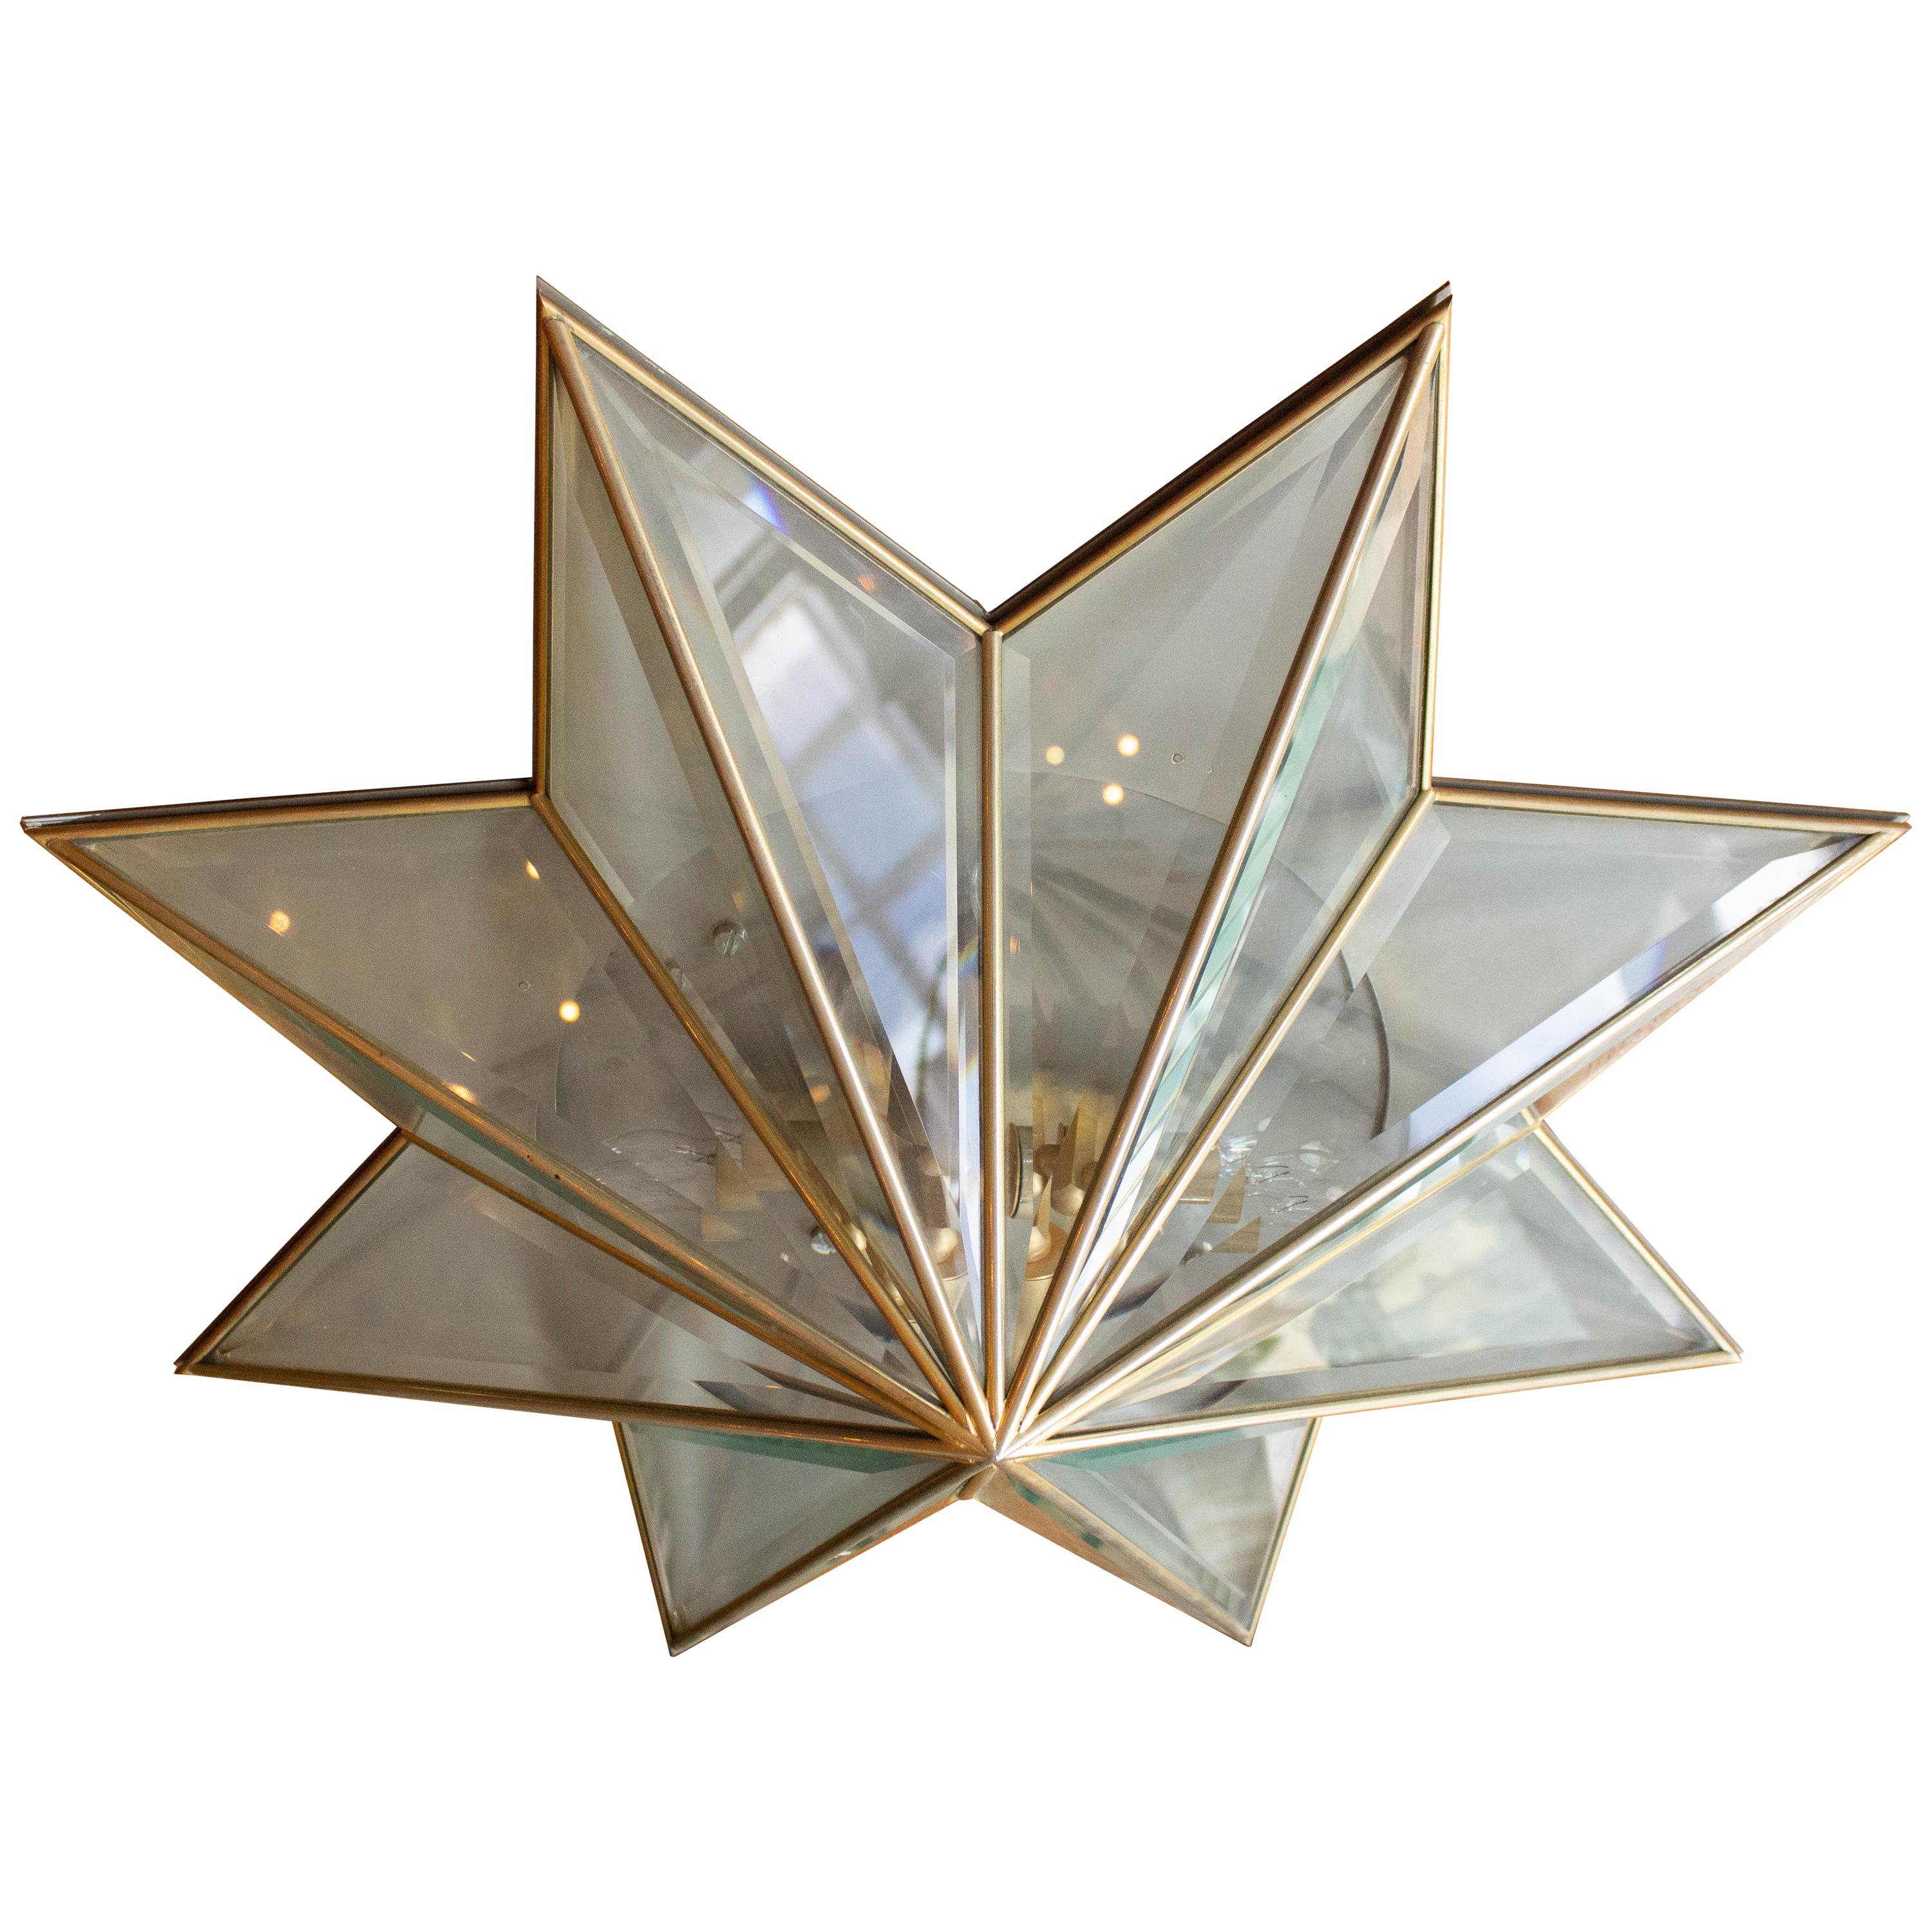 1970s French Starburst Ceiling Fixture